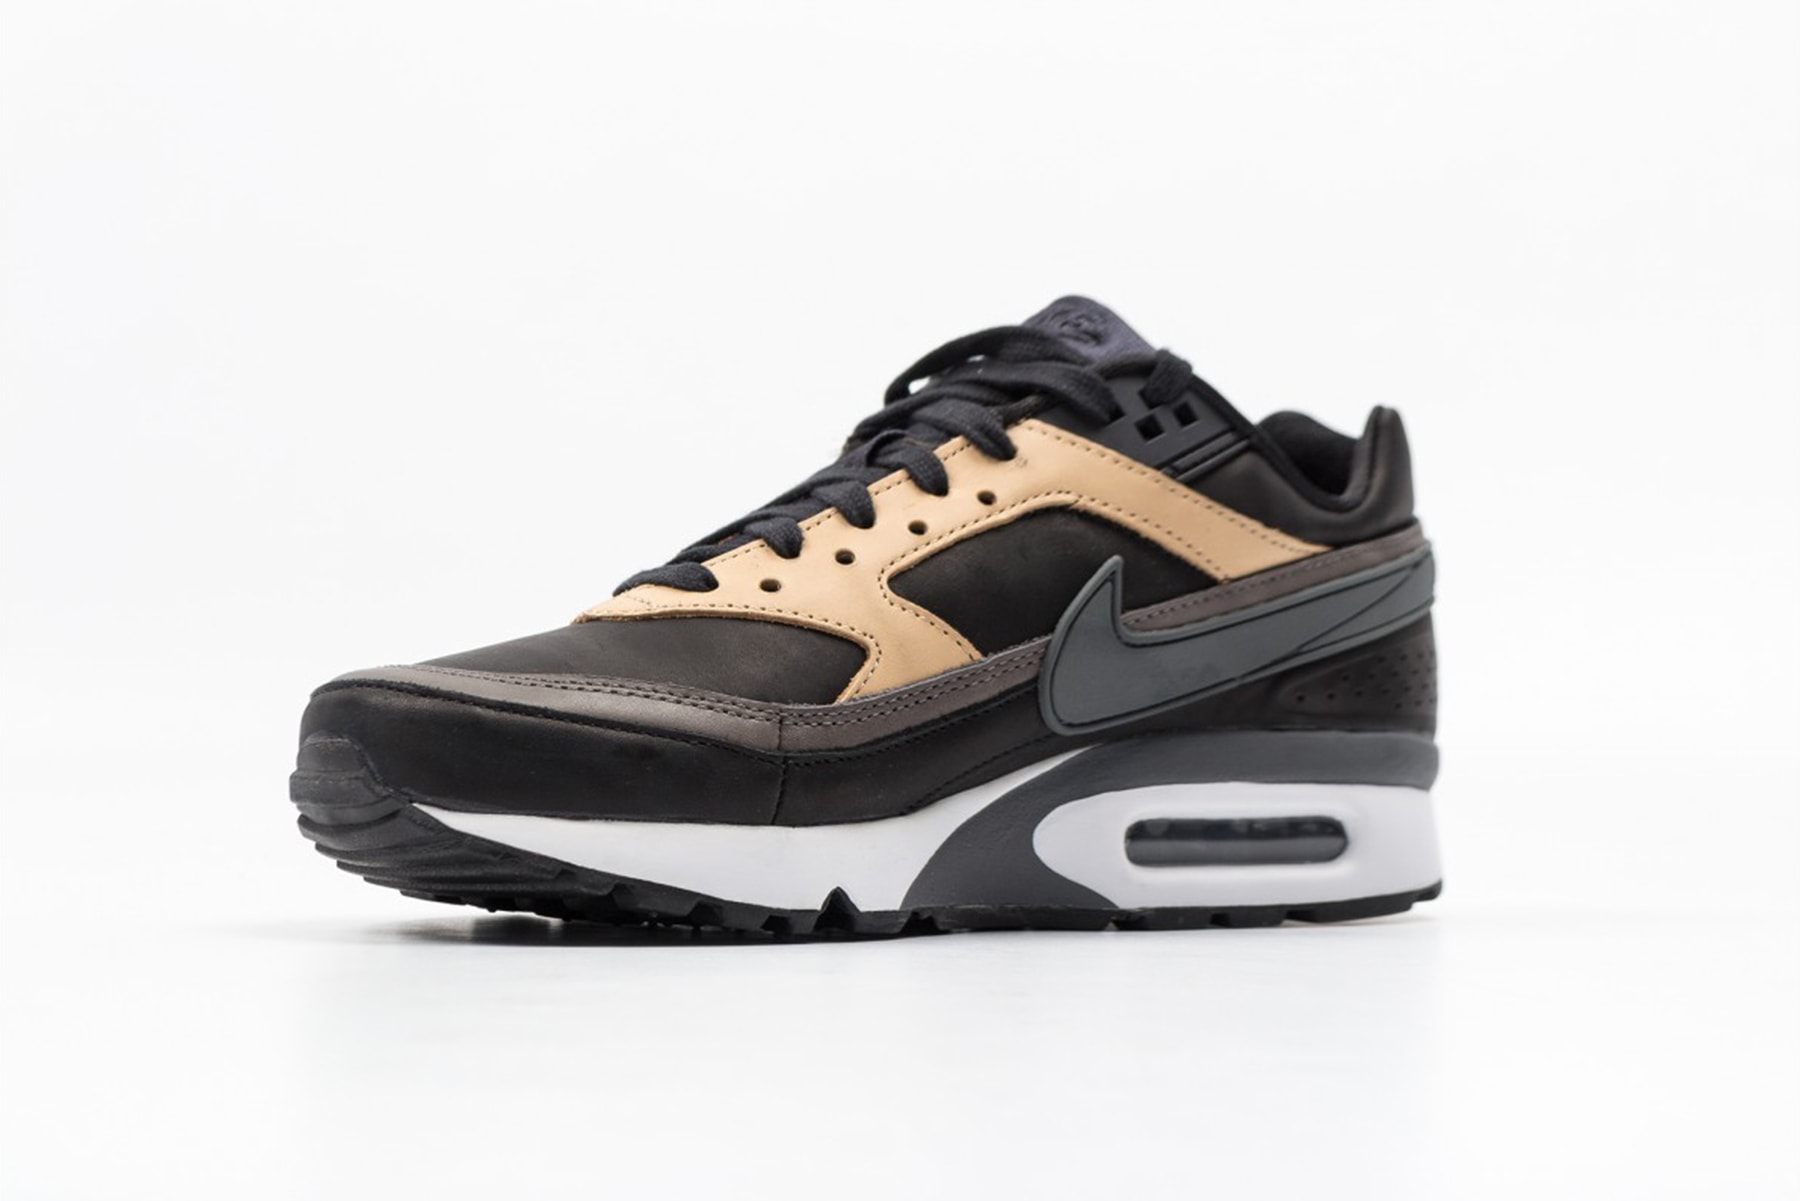 Nike Air Max BW Another "Vachetta Tan" Makeover